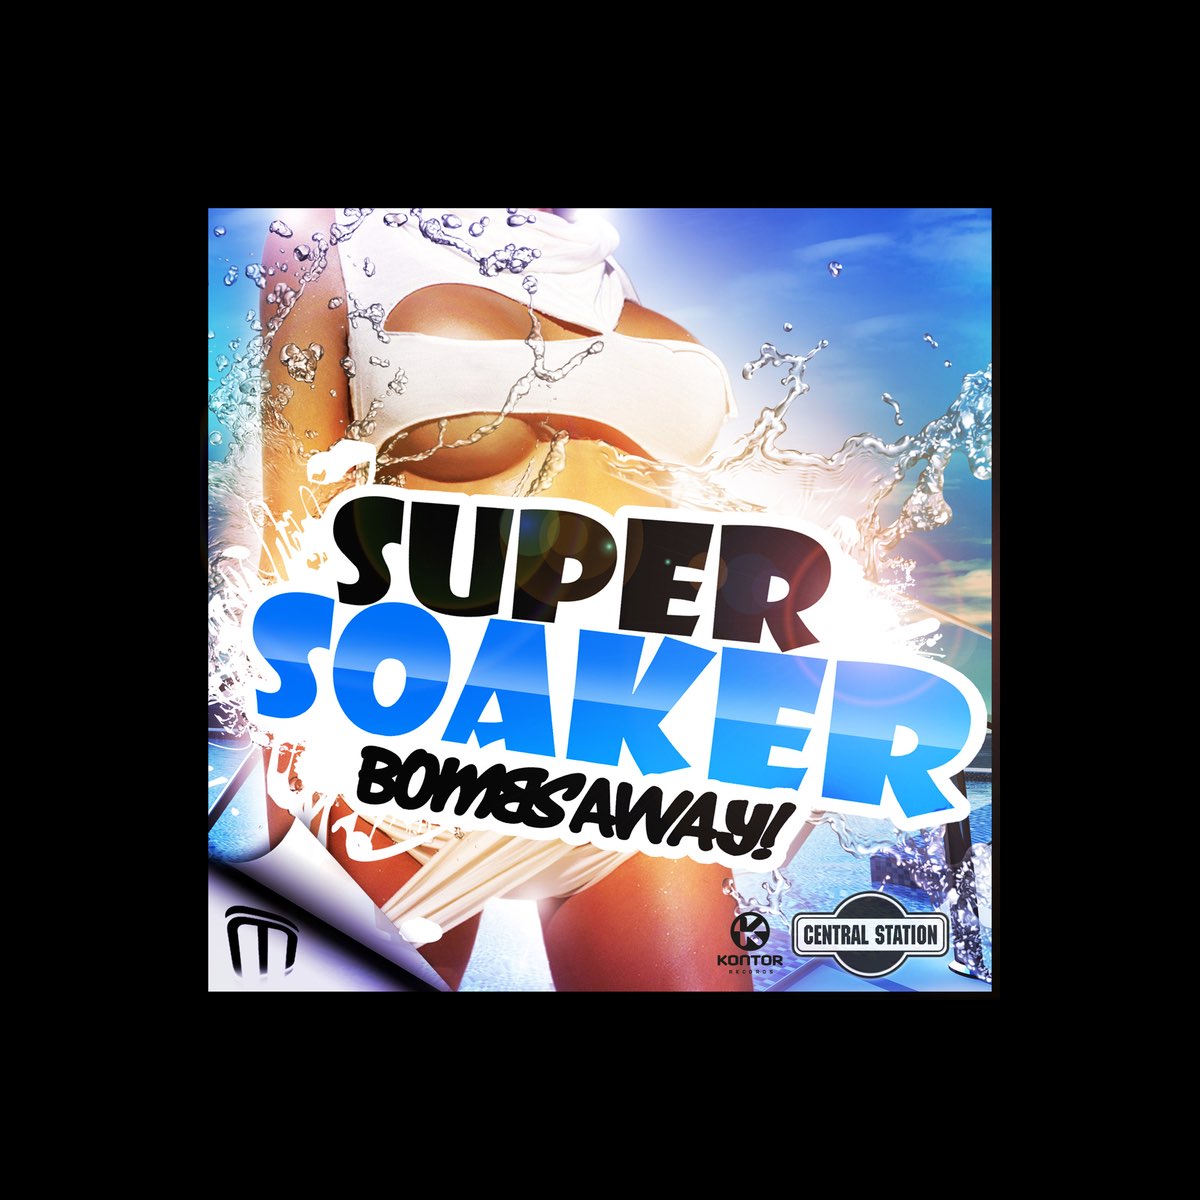 Super Soaker (Remixes) by Bombs Away on Apple Music